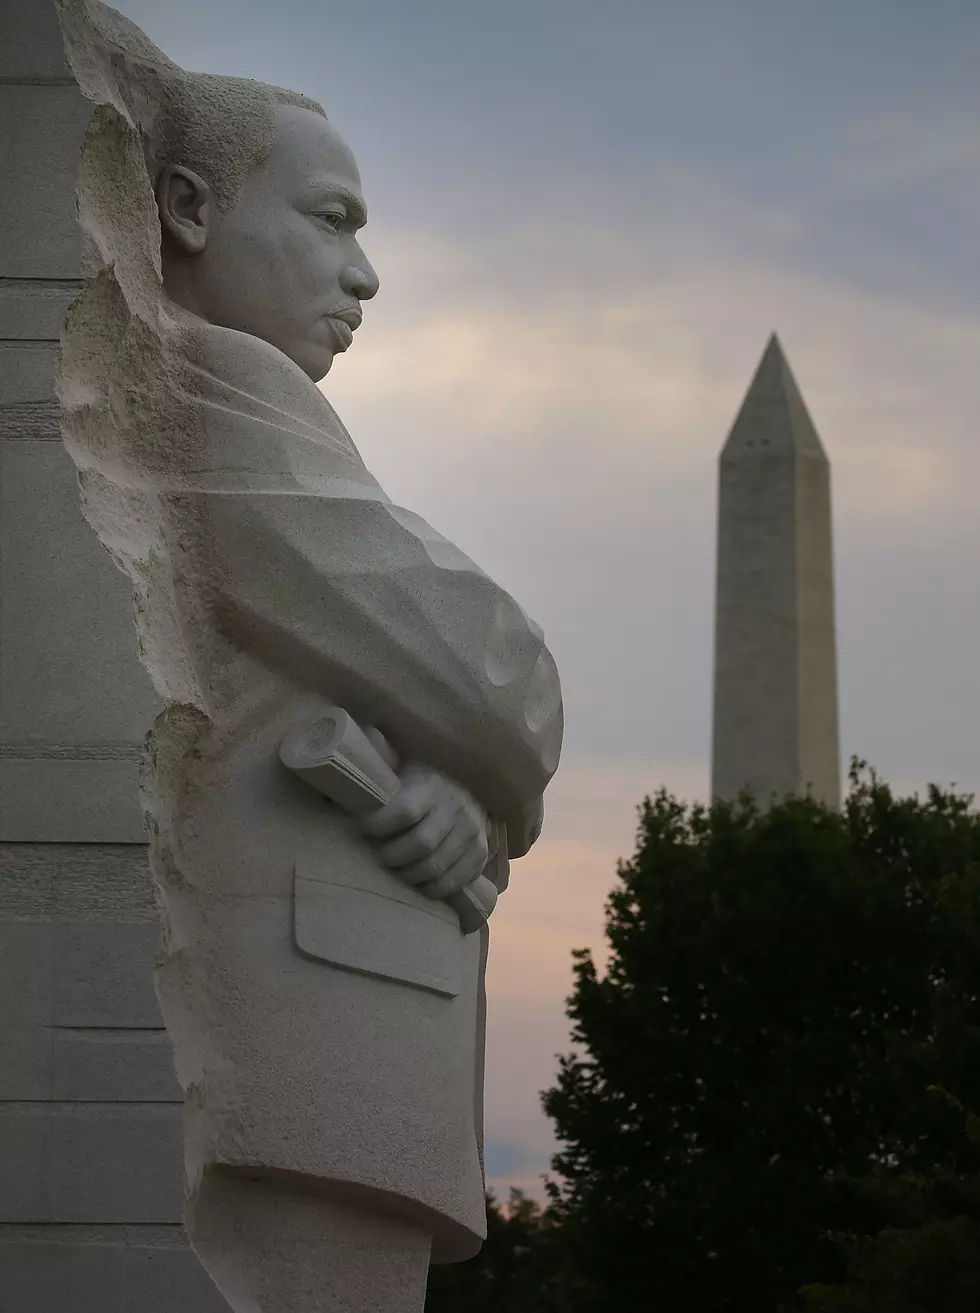 Dr. King's Kids And Grandchild Read, "I Have A Dream" Address